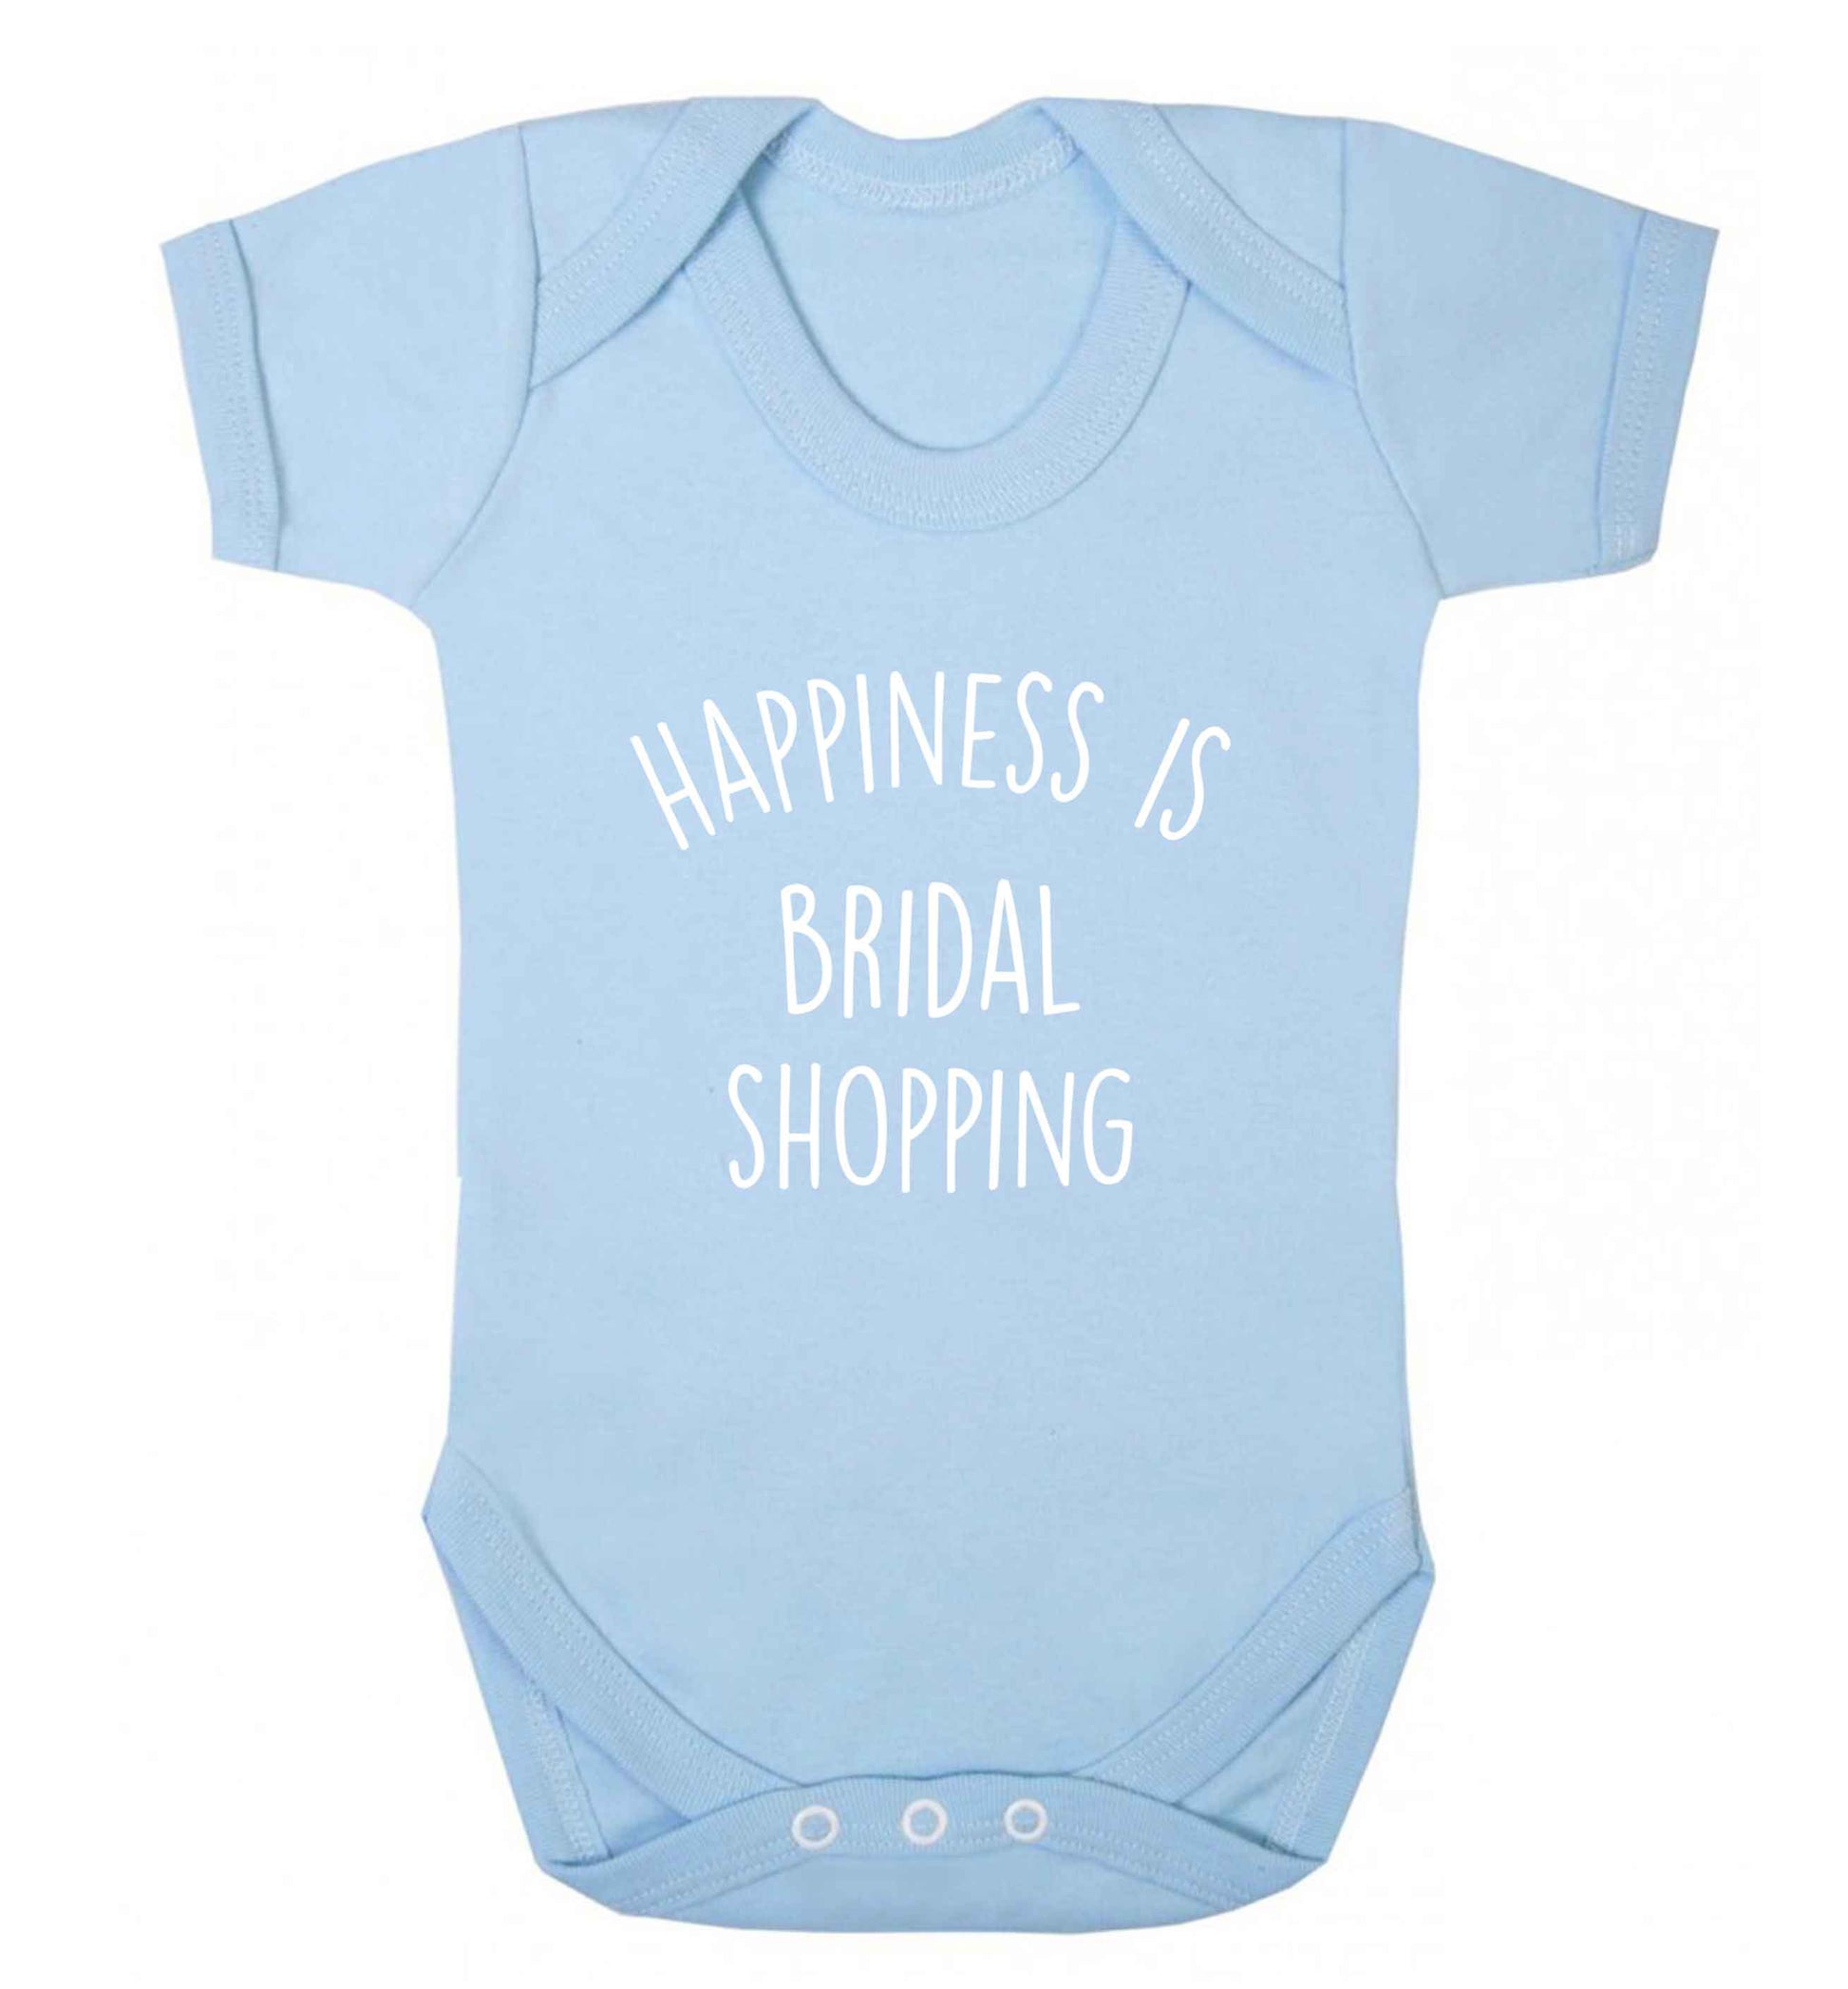 Happiness is bridal shopping baby vest pale blue 18-24 months